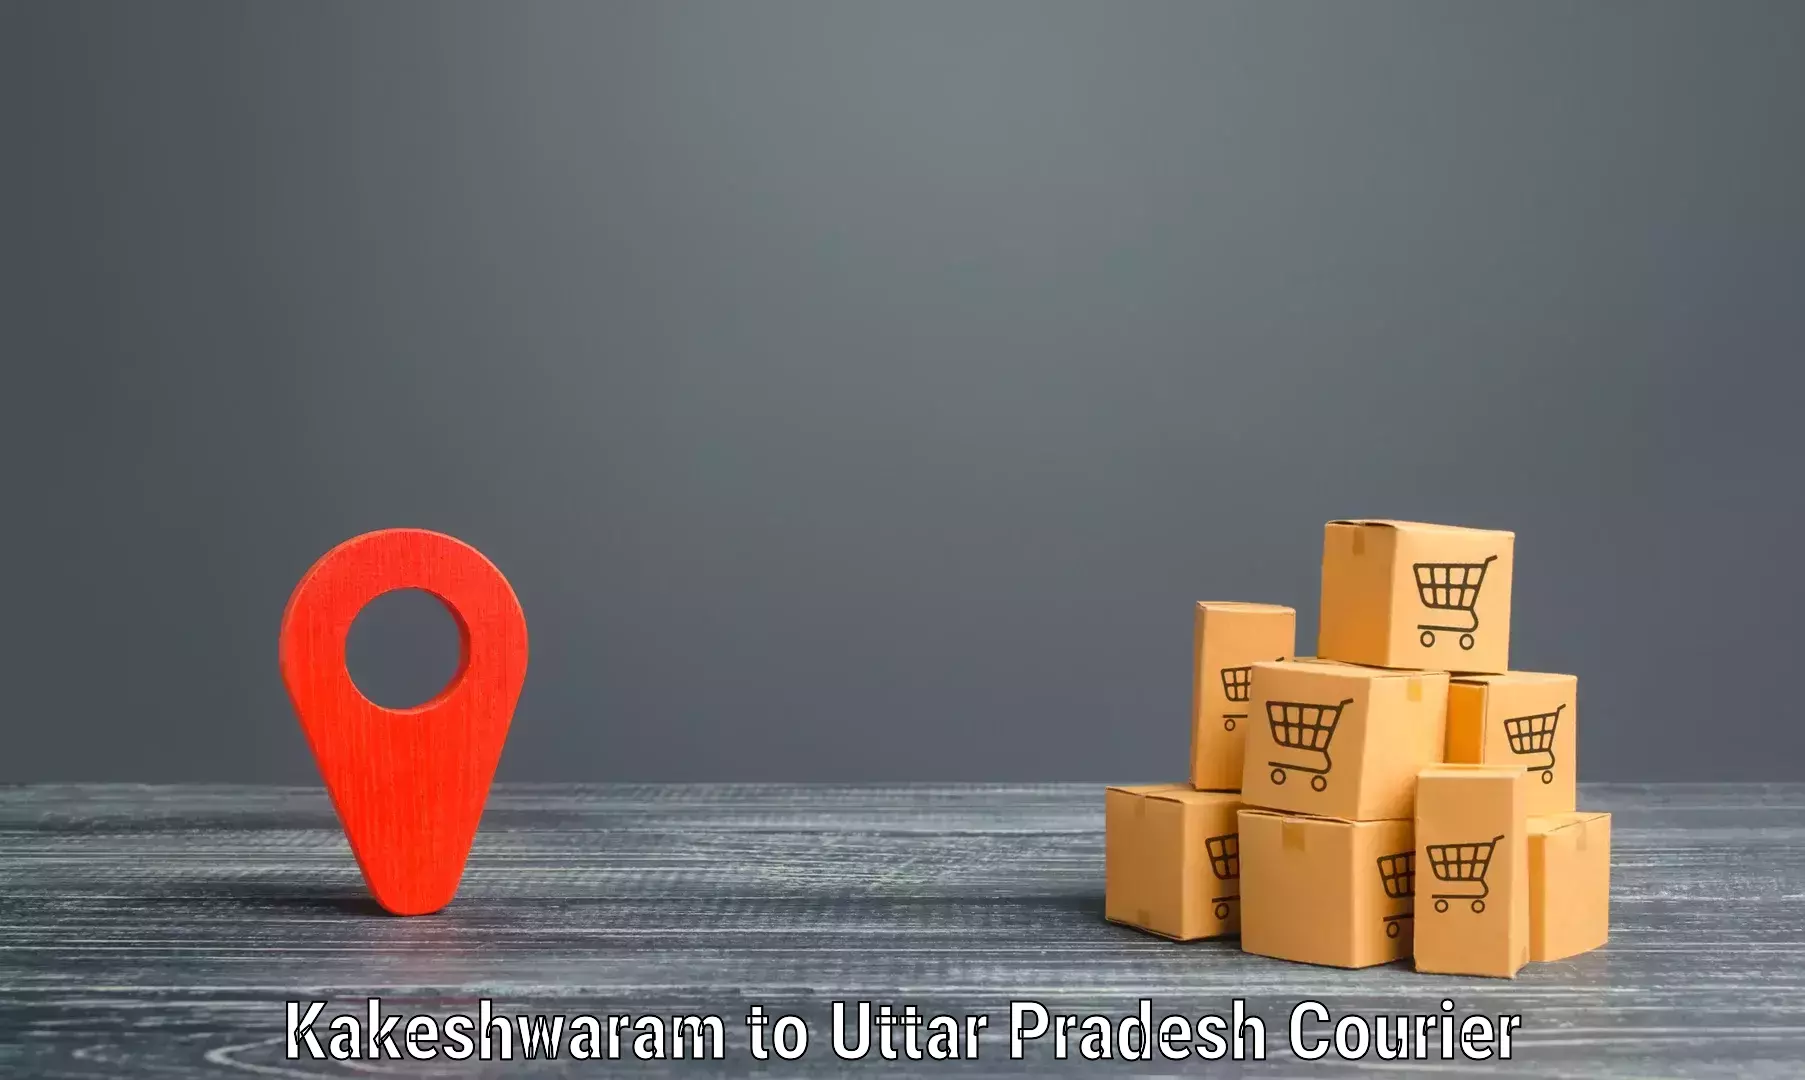 Discount courier rates in Kakeshwaram to Lucknow